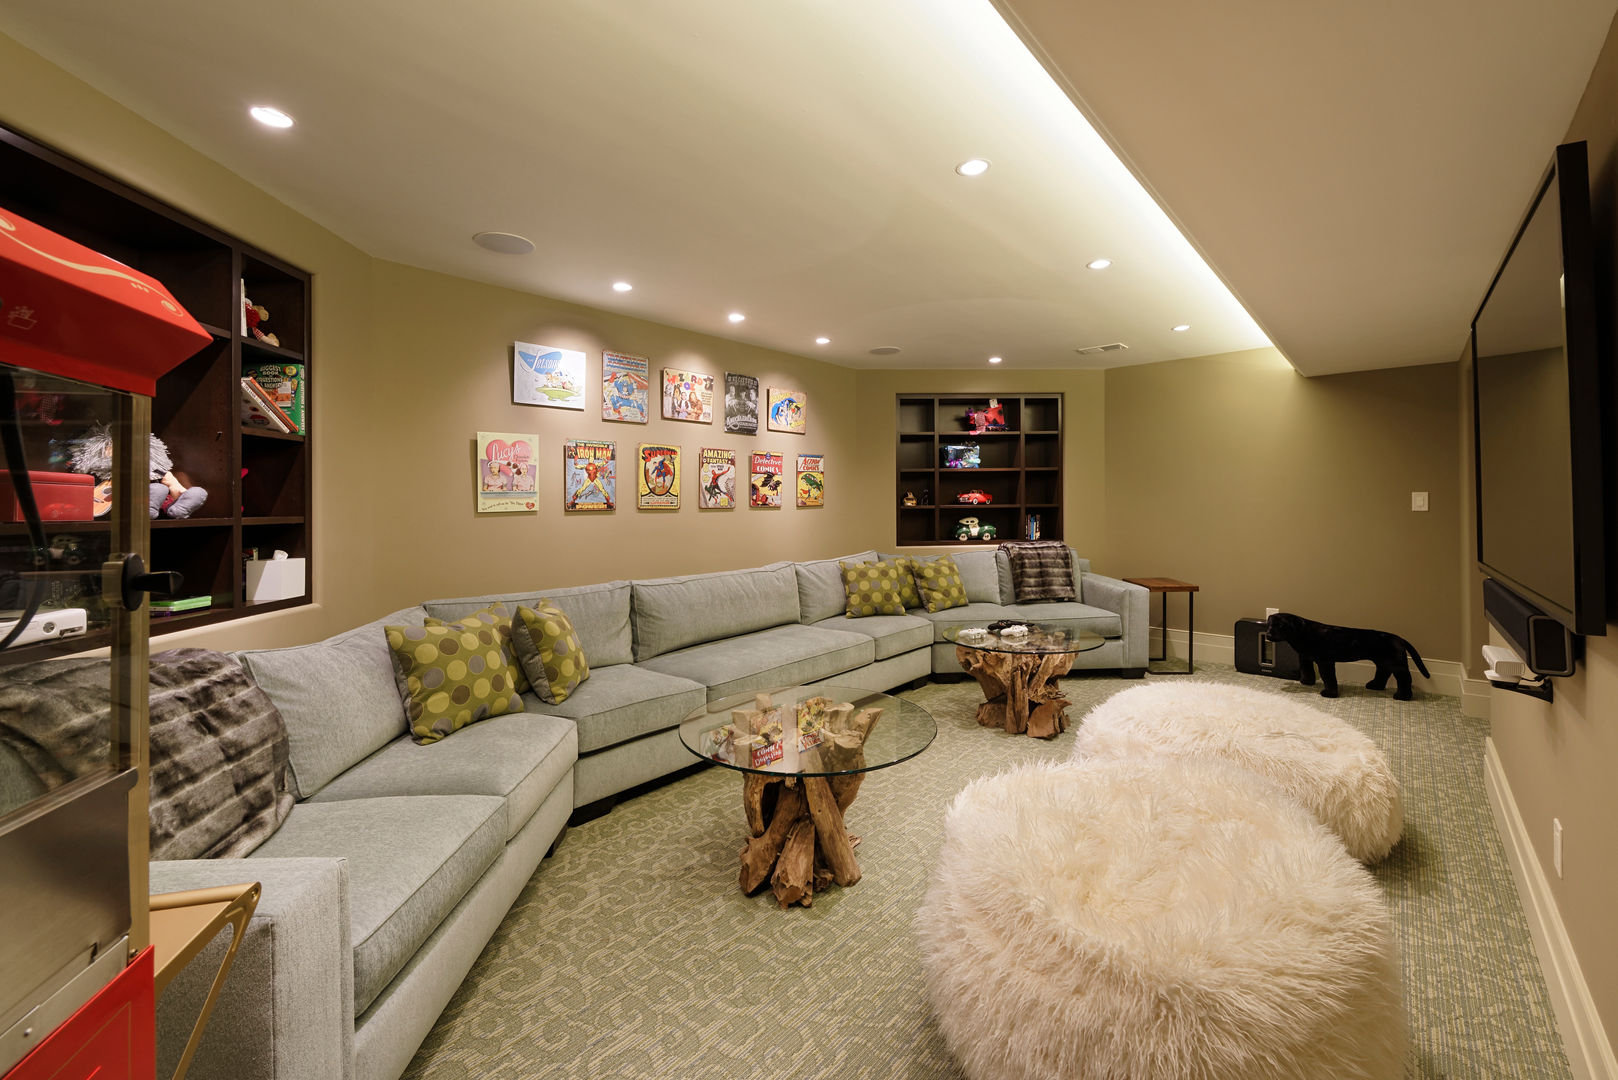 Fire Restoration in Chevy Chase Creates Opportunity for Whole House Renovation BOWA - Design Build Experts Classic style media room